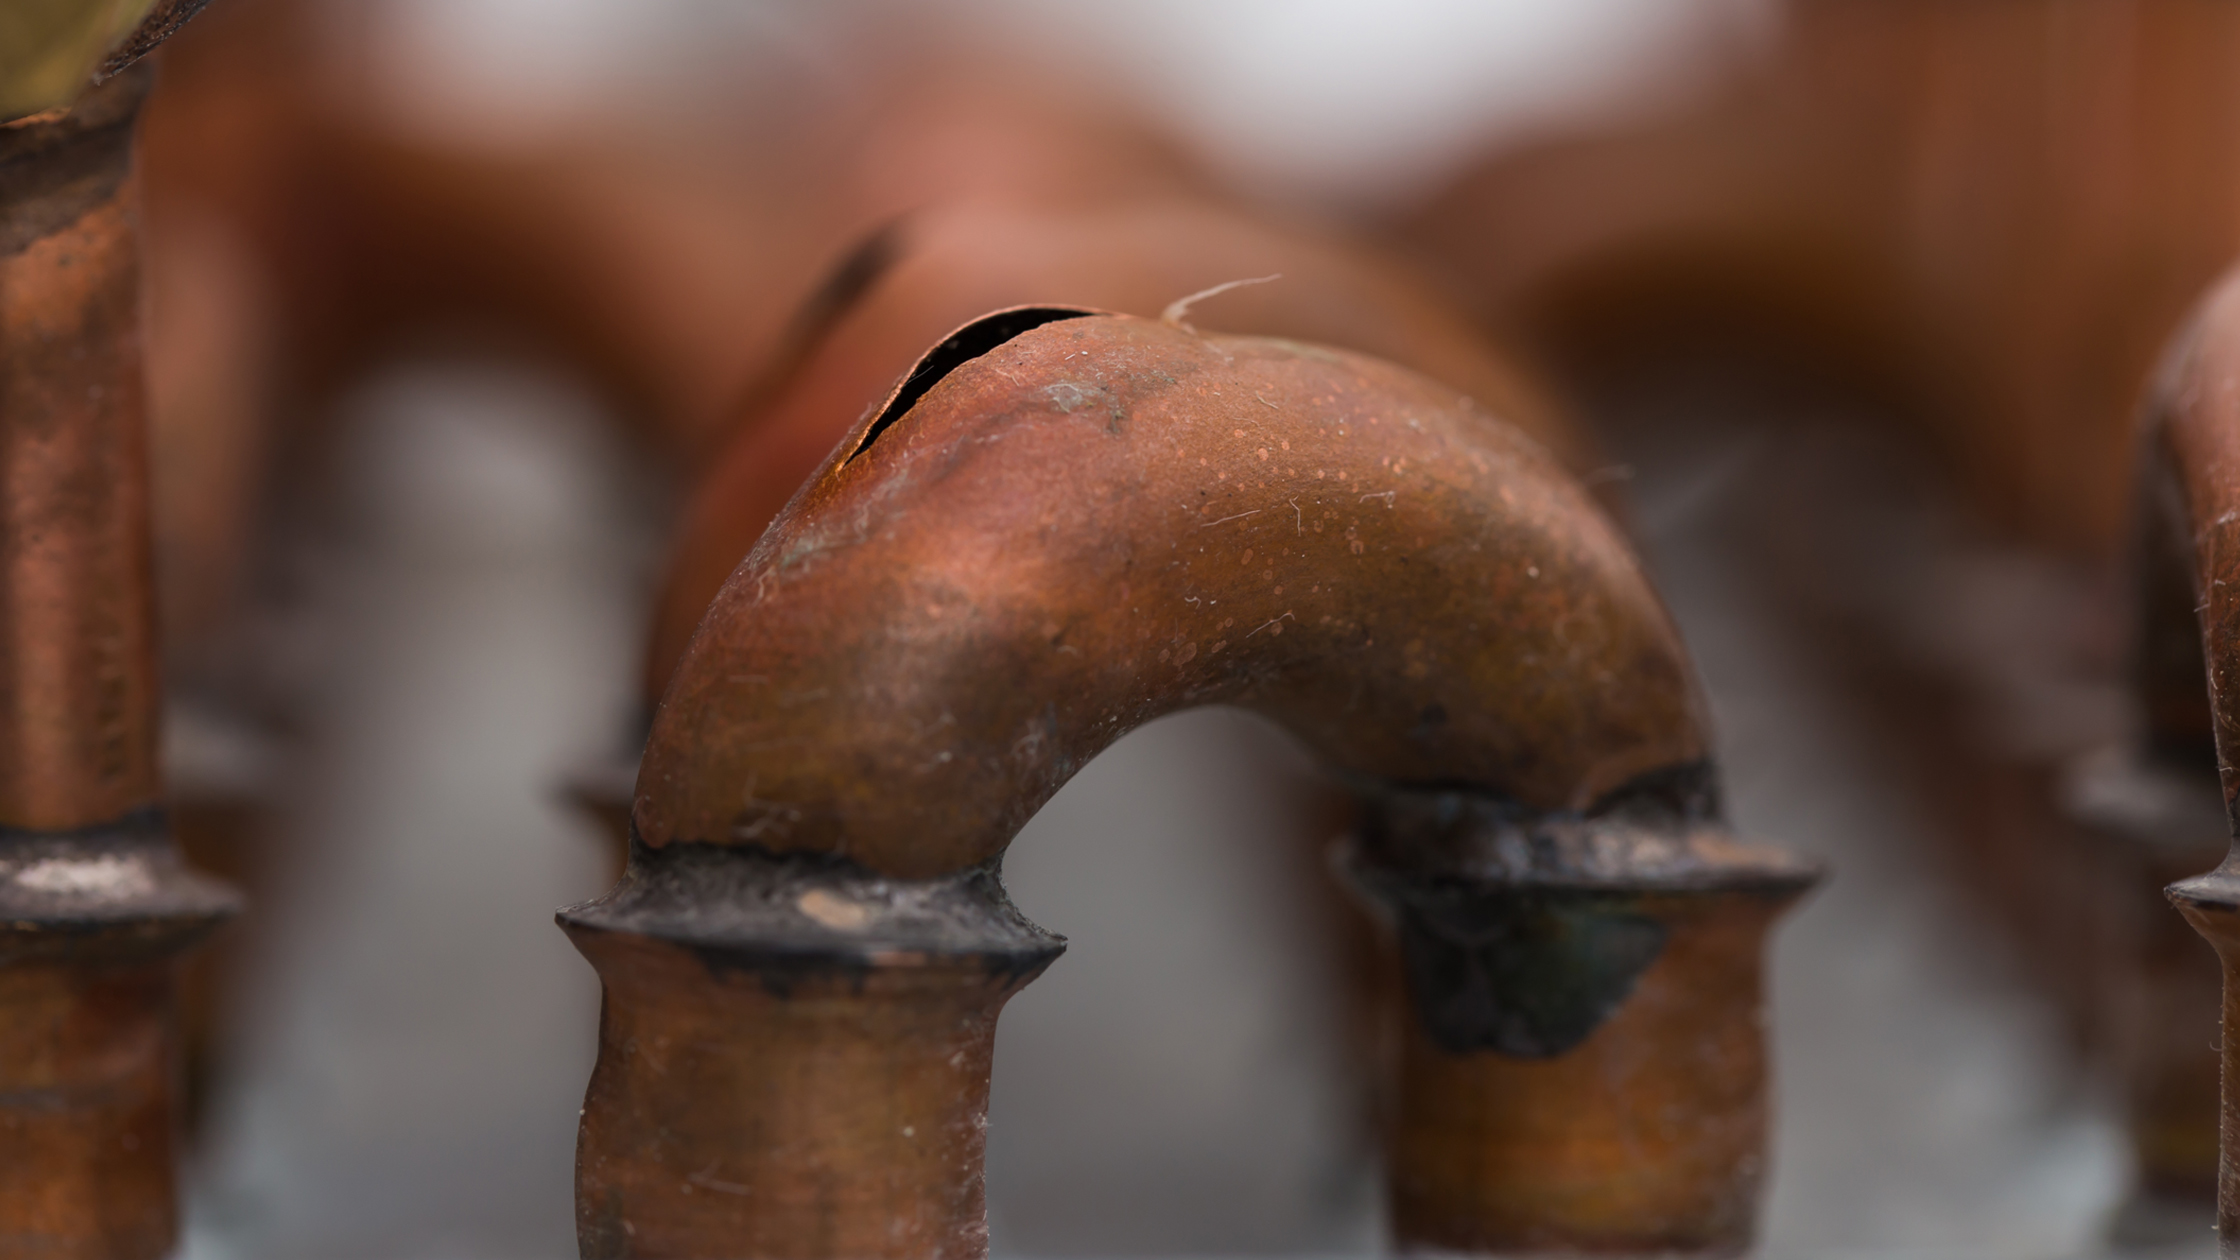 Pipe freeze prevention: 15 tips to help avoid this costly risk